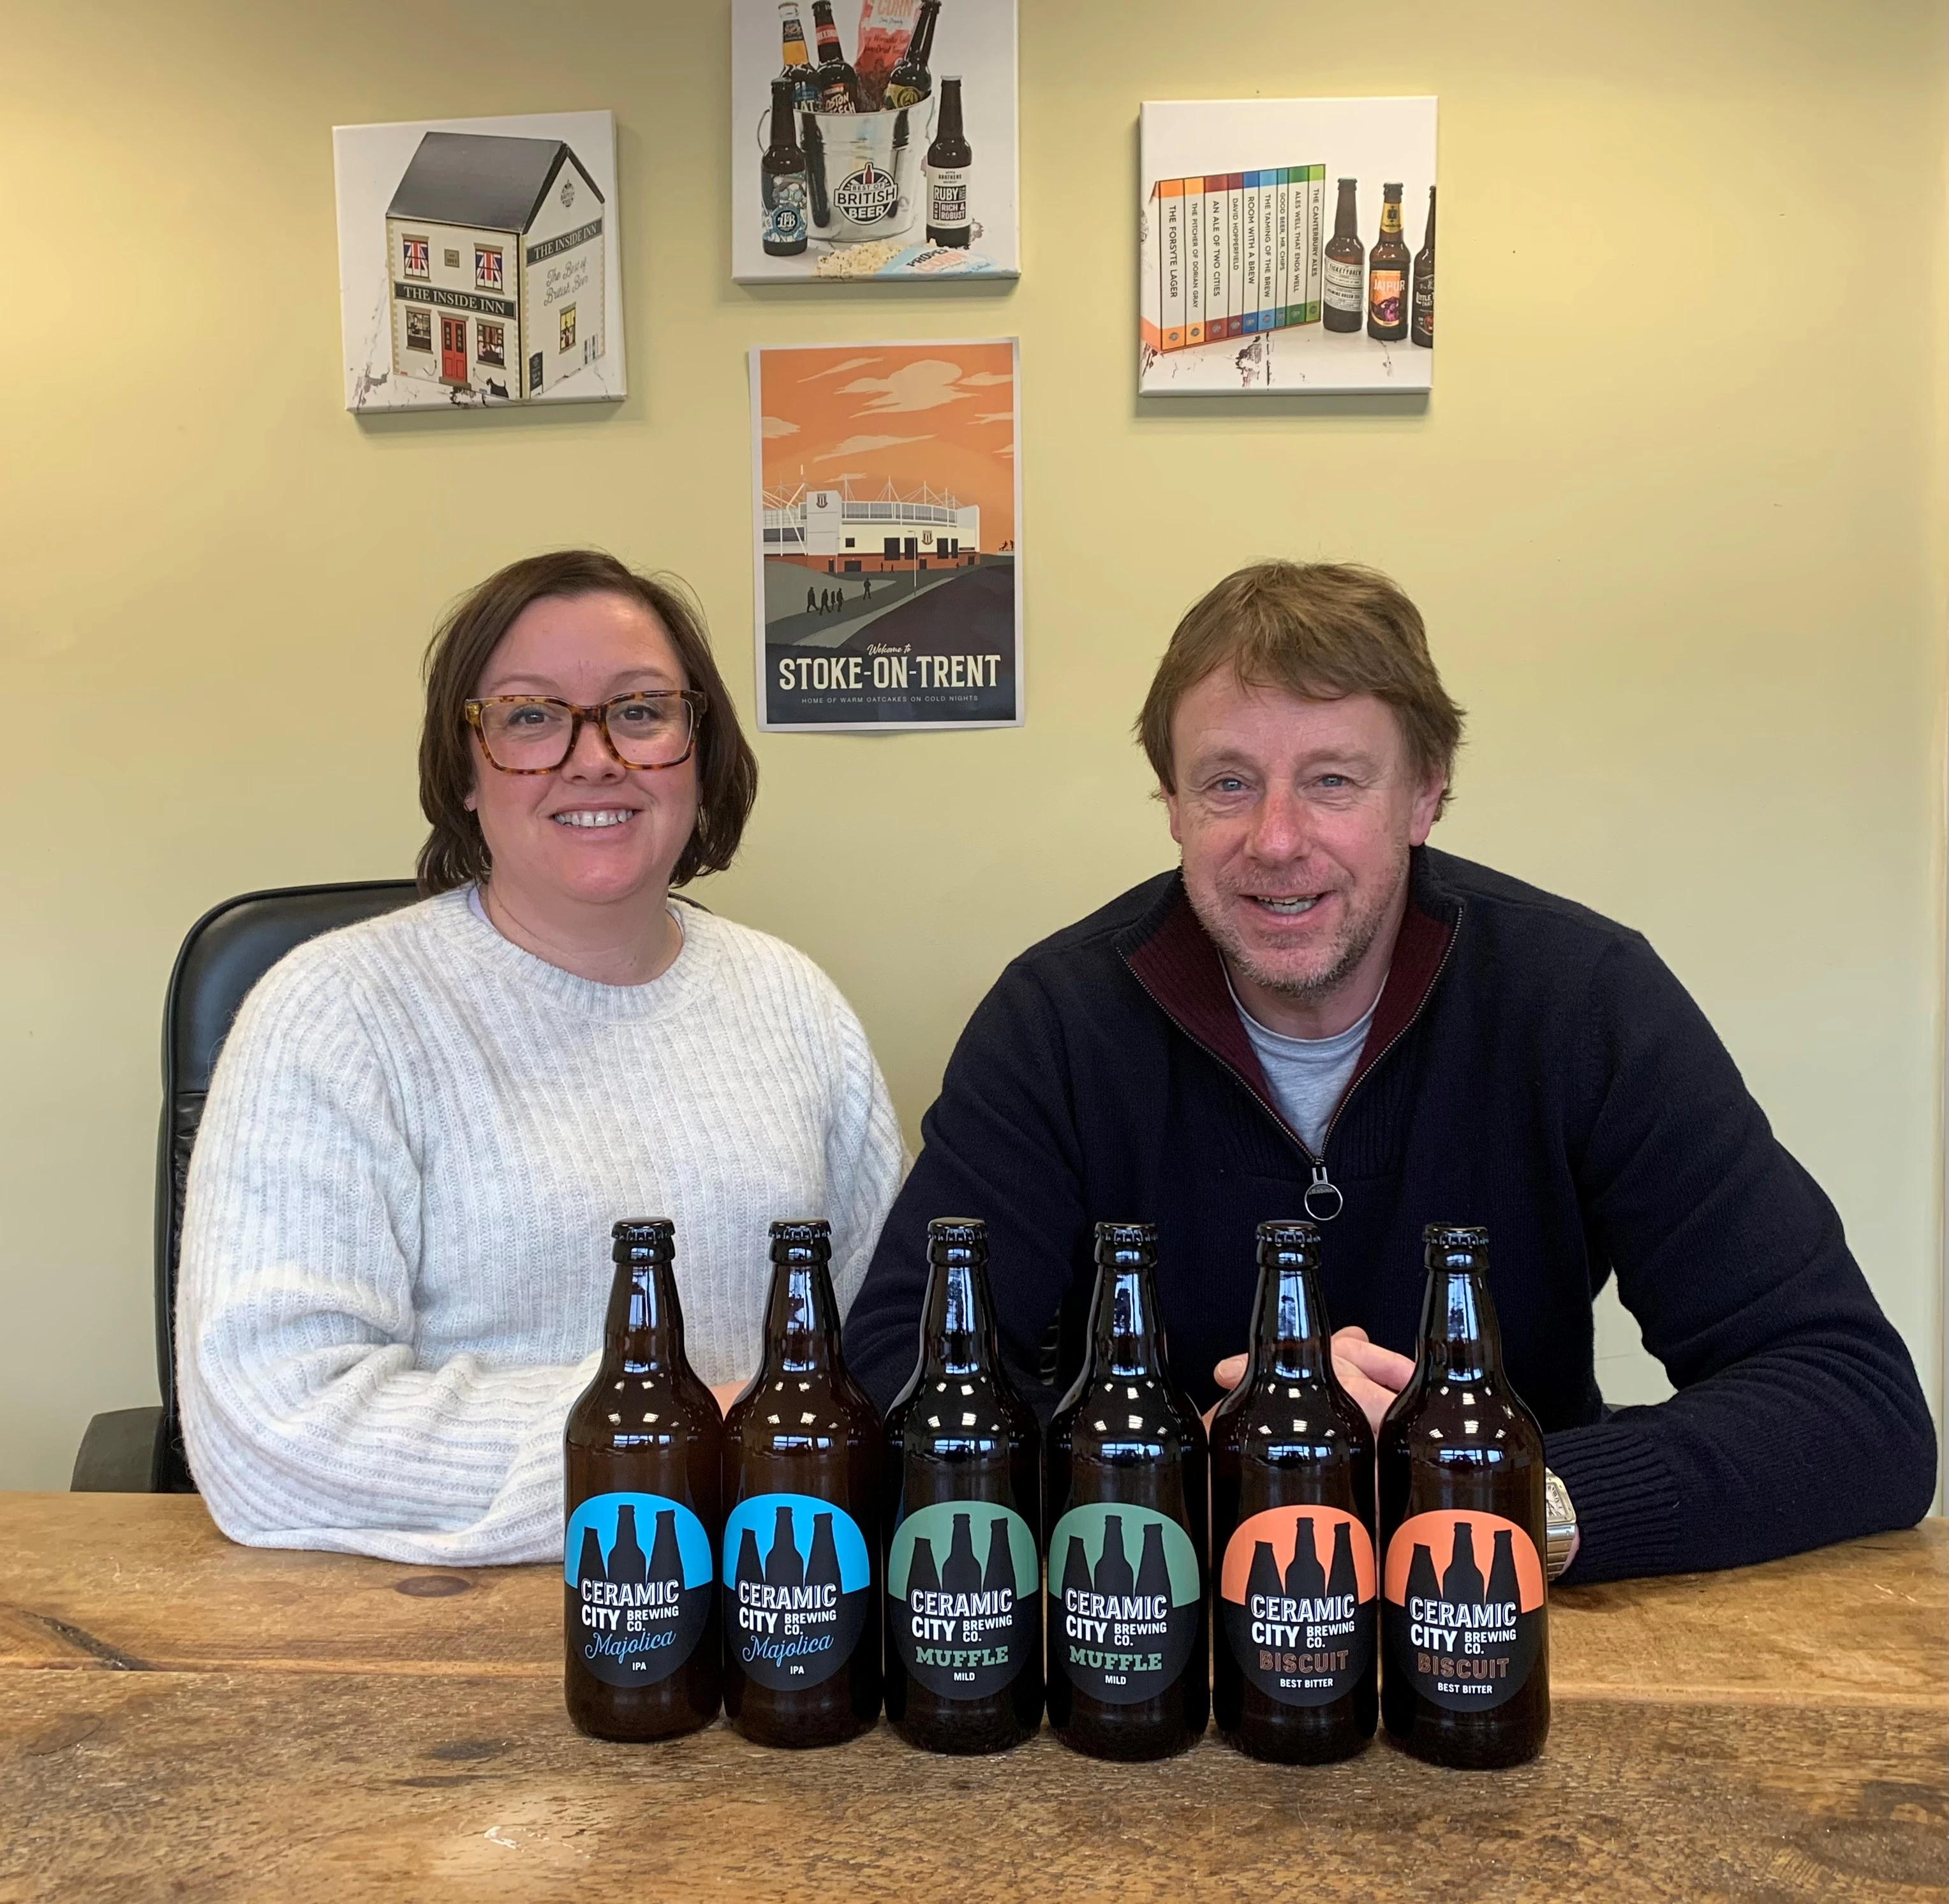 Gill and Will Sherwin with the new release of Ceramic City beer